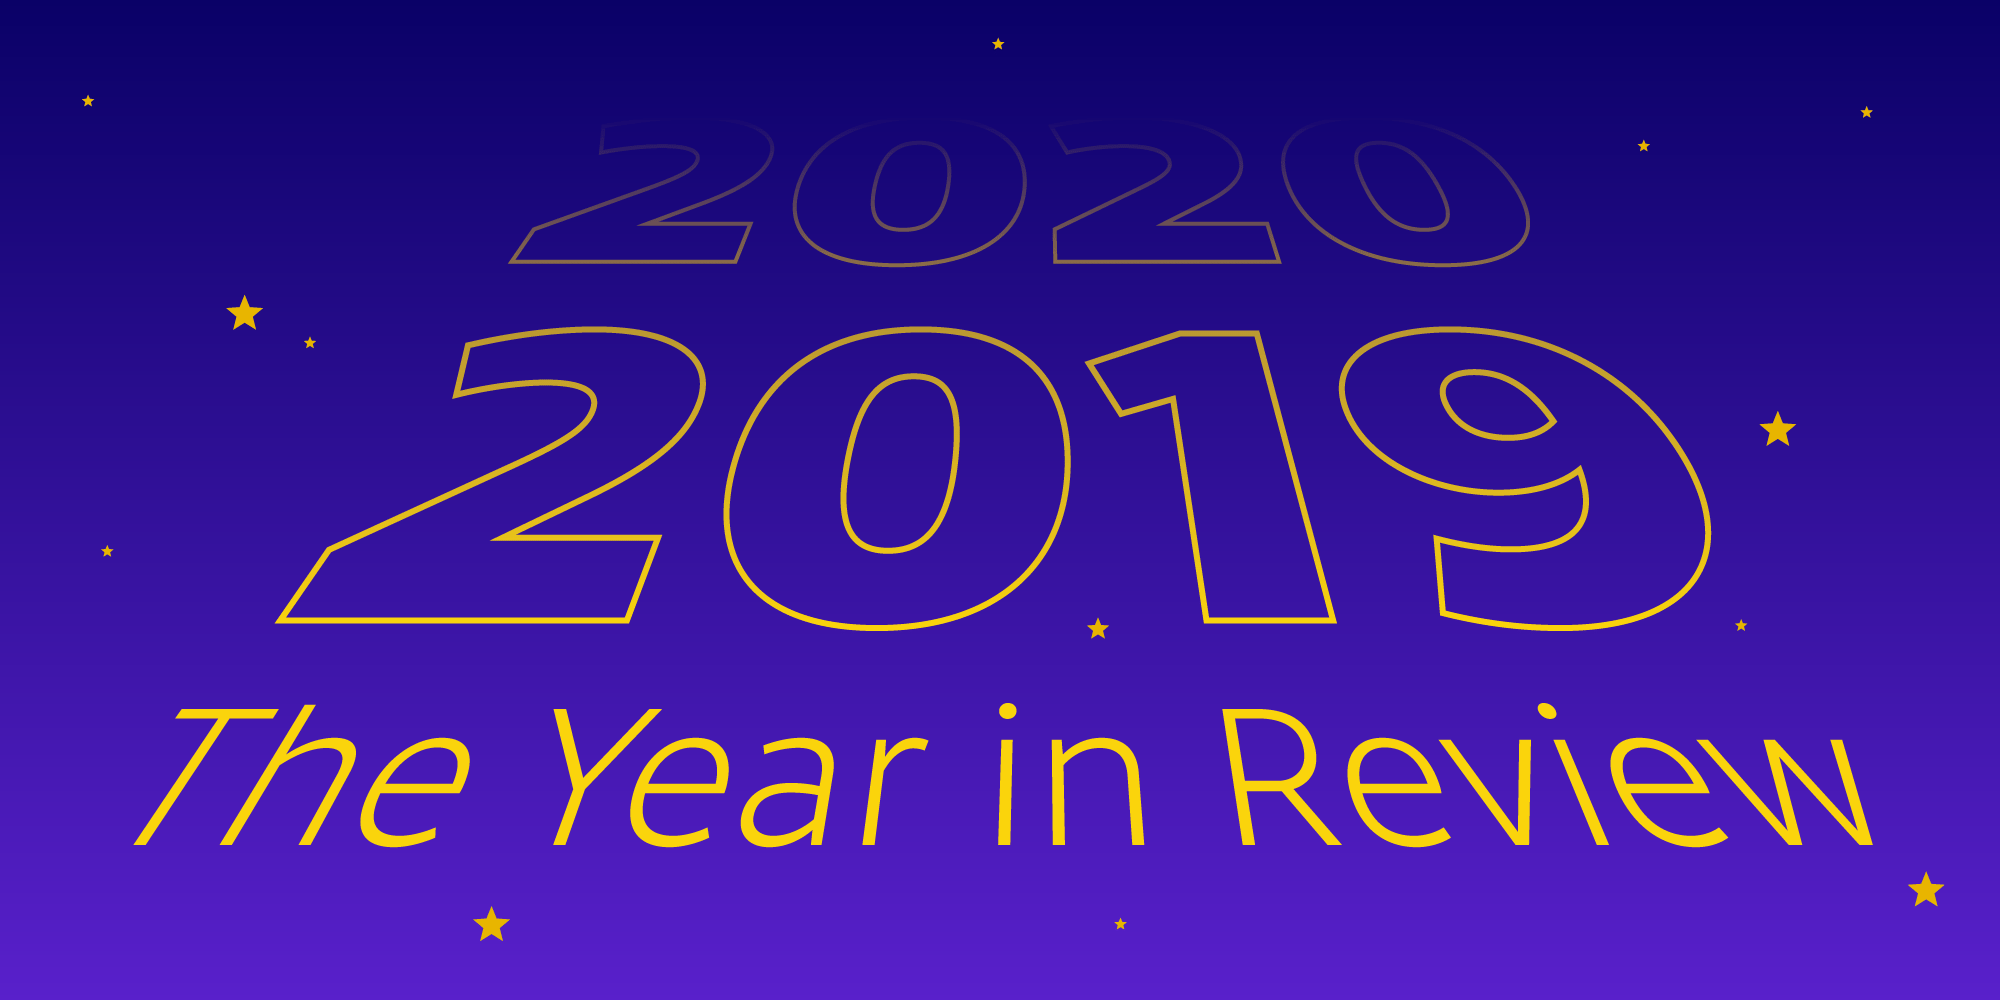 Illustration: 2019: Year in Review